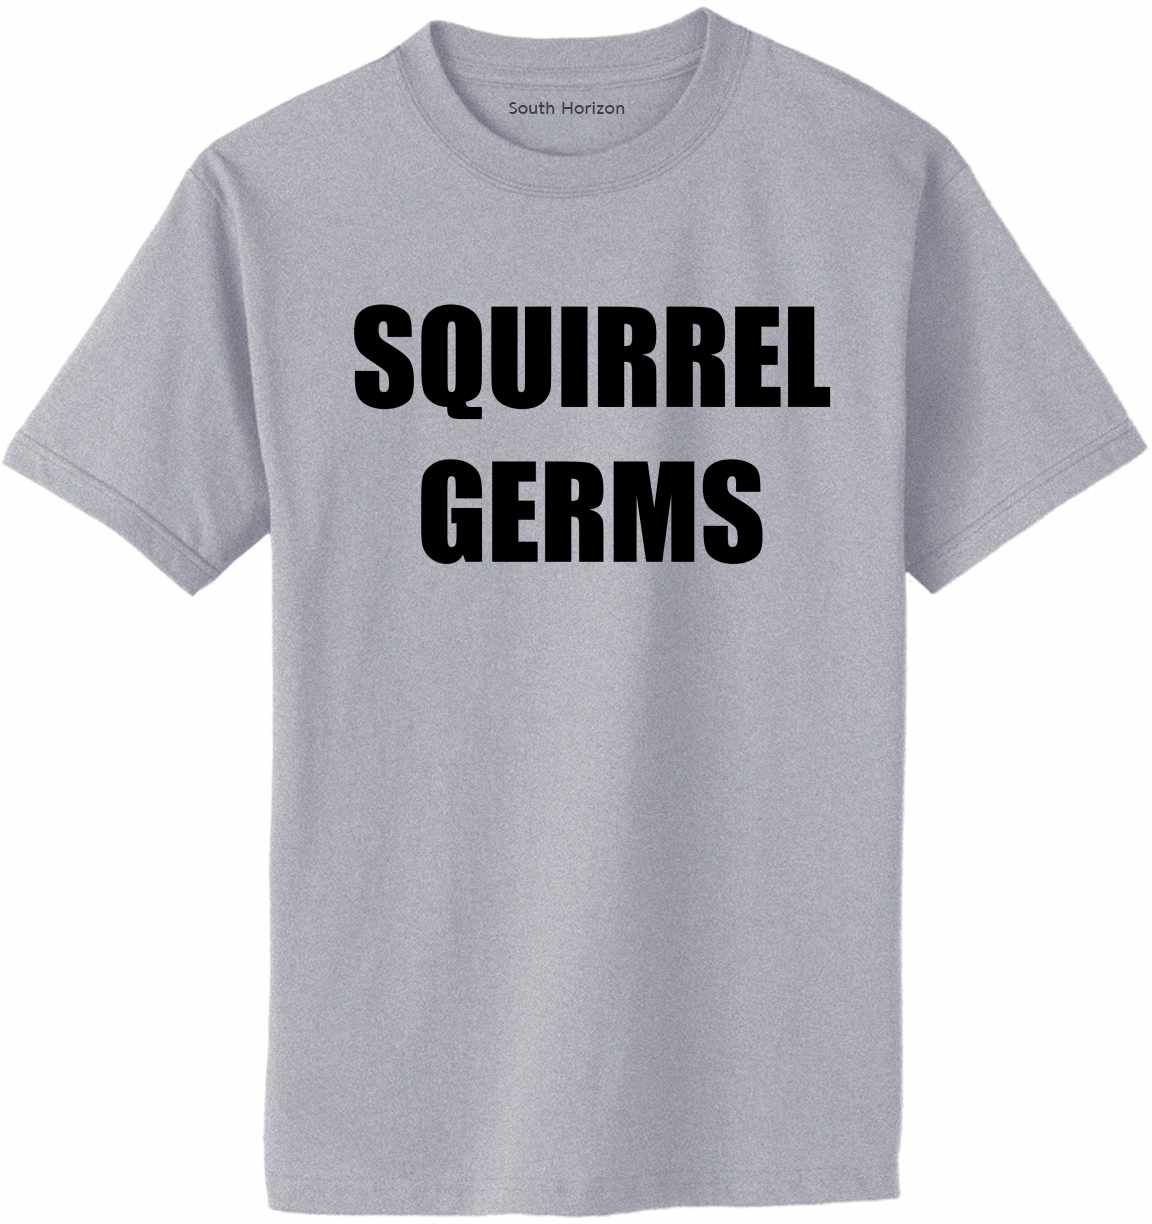 SQUIRREL GERMS Adult T-Shirt (#692-1)